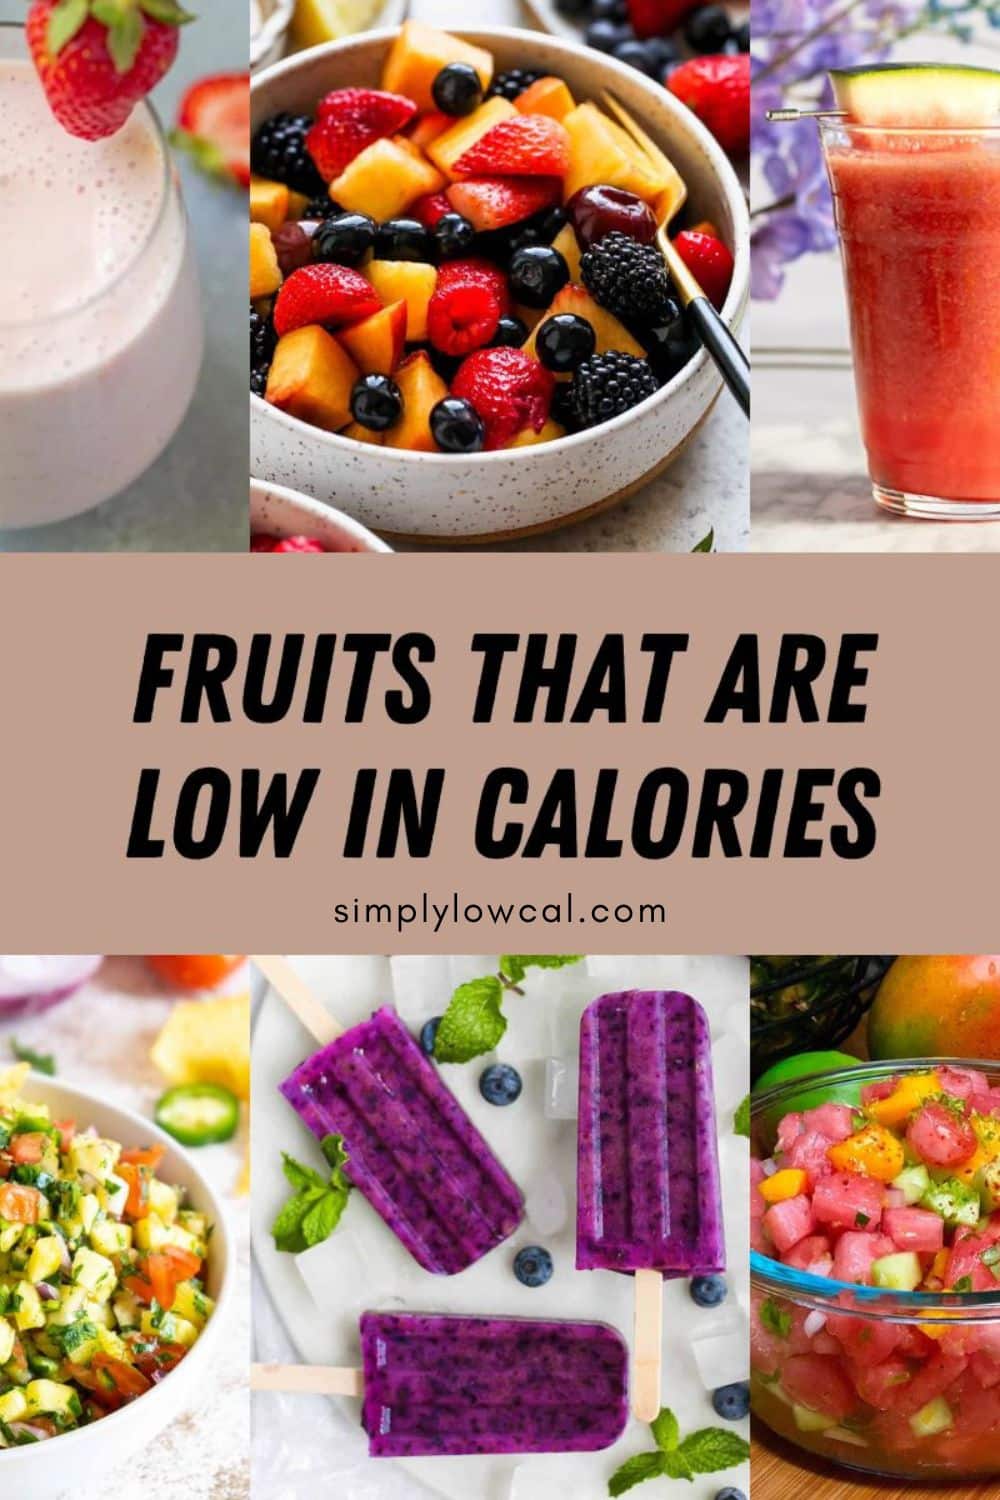 Thumbnail of fruits that are low in calories.